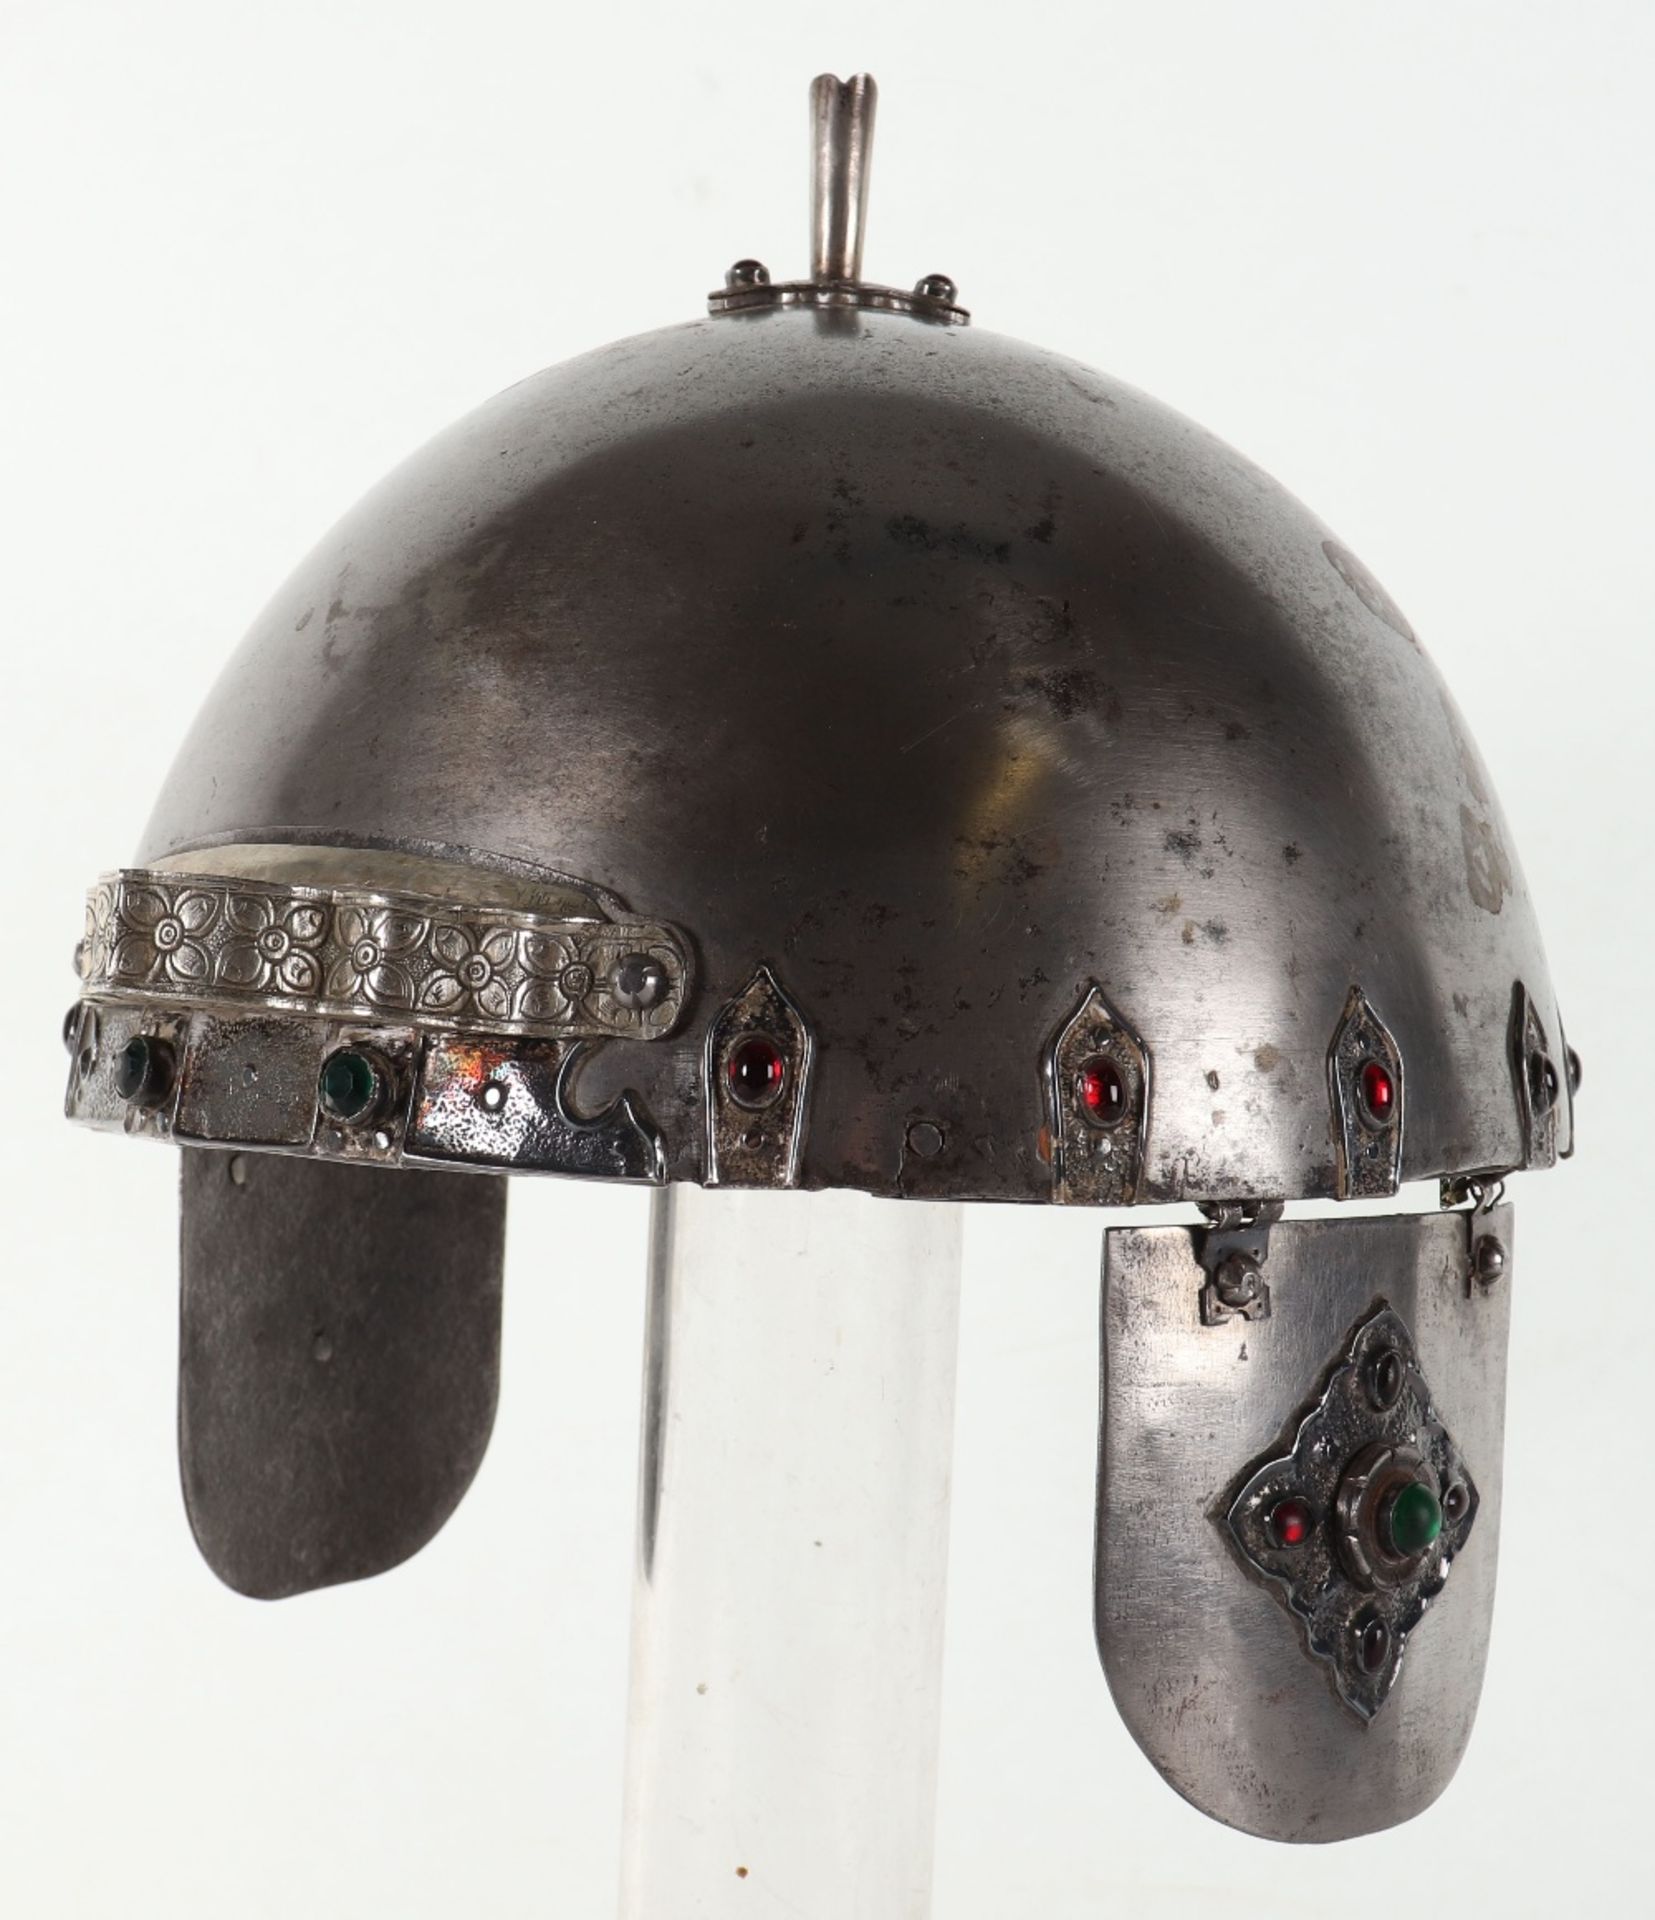 Bhutanese Helmet Possibly 18th or 19th Century - Image 13 of 15